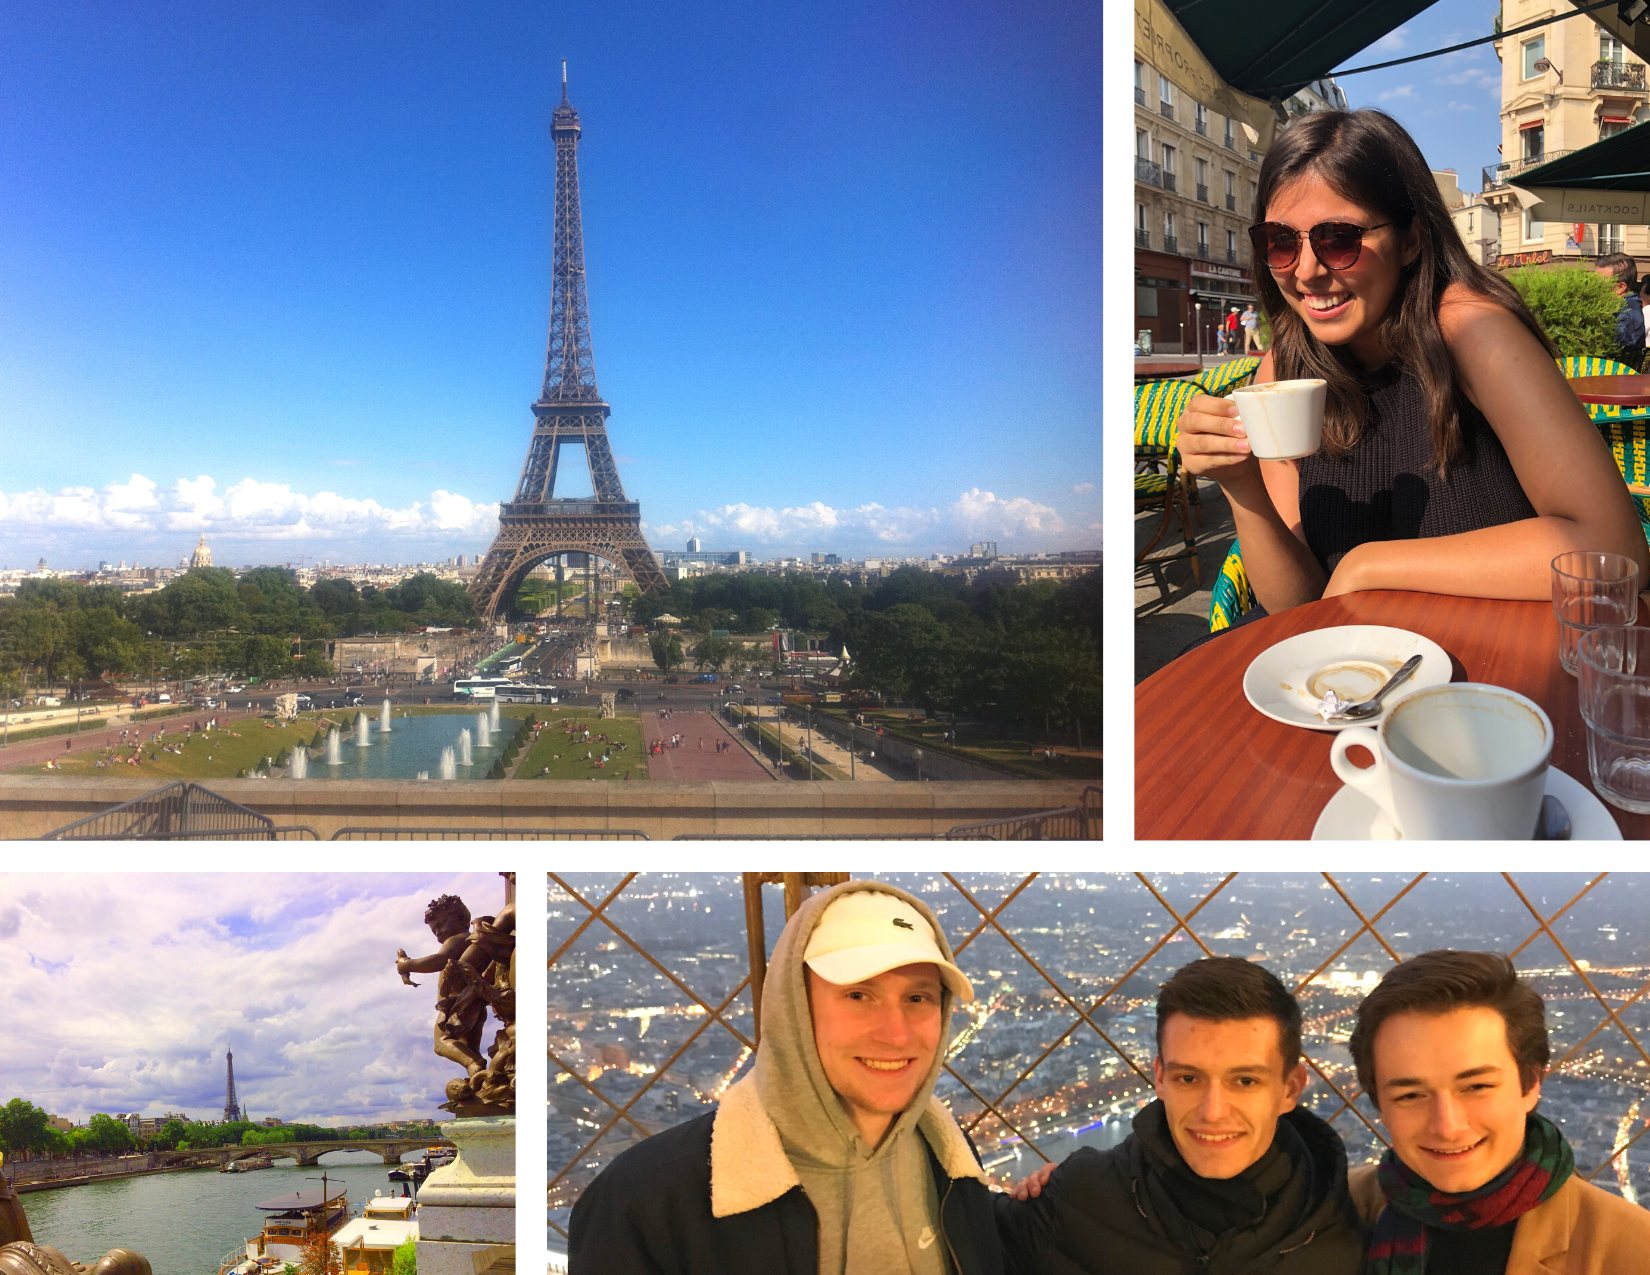 A collage of four images: The Eiffel tower, a person sitting at an outdoor café drinking coffee, a scenic view of Paris, and a close-up of three people standing together.